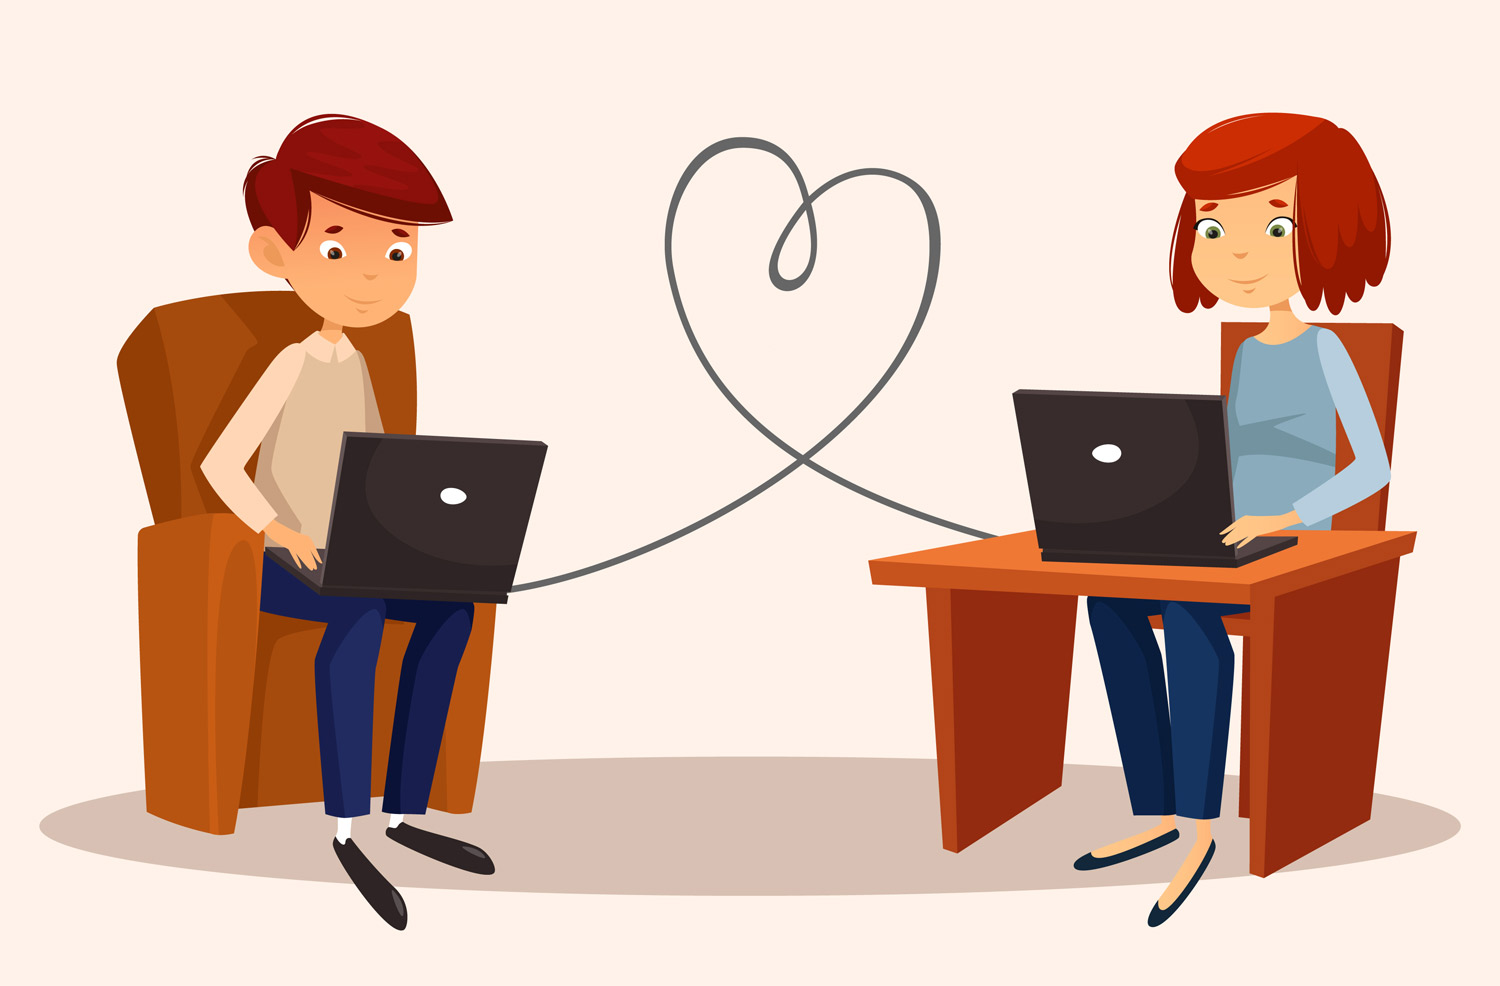 online dating long distance relationship